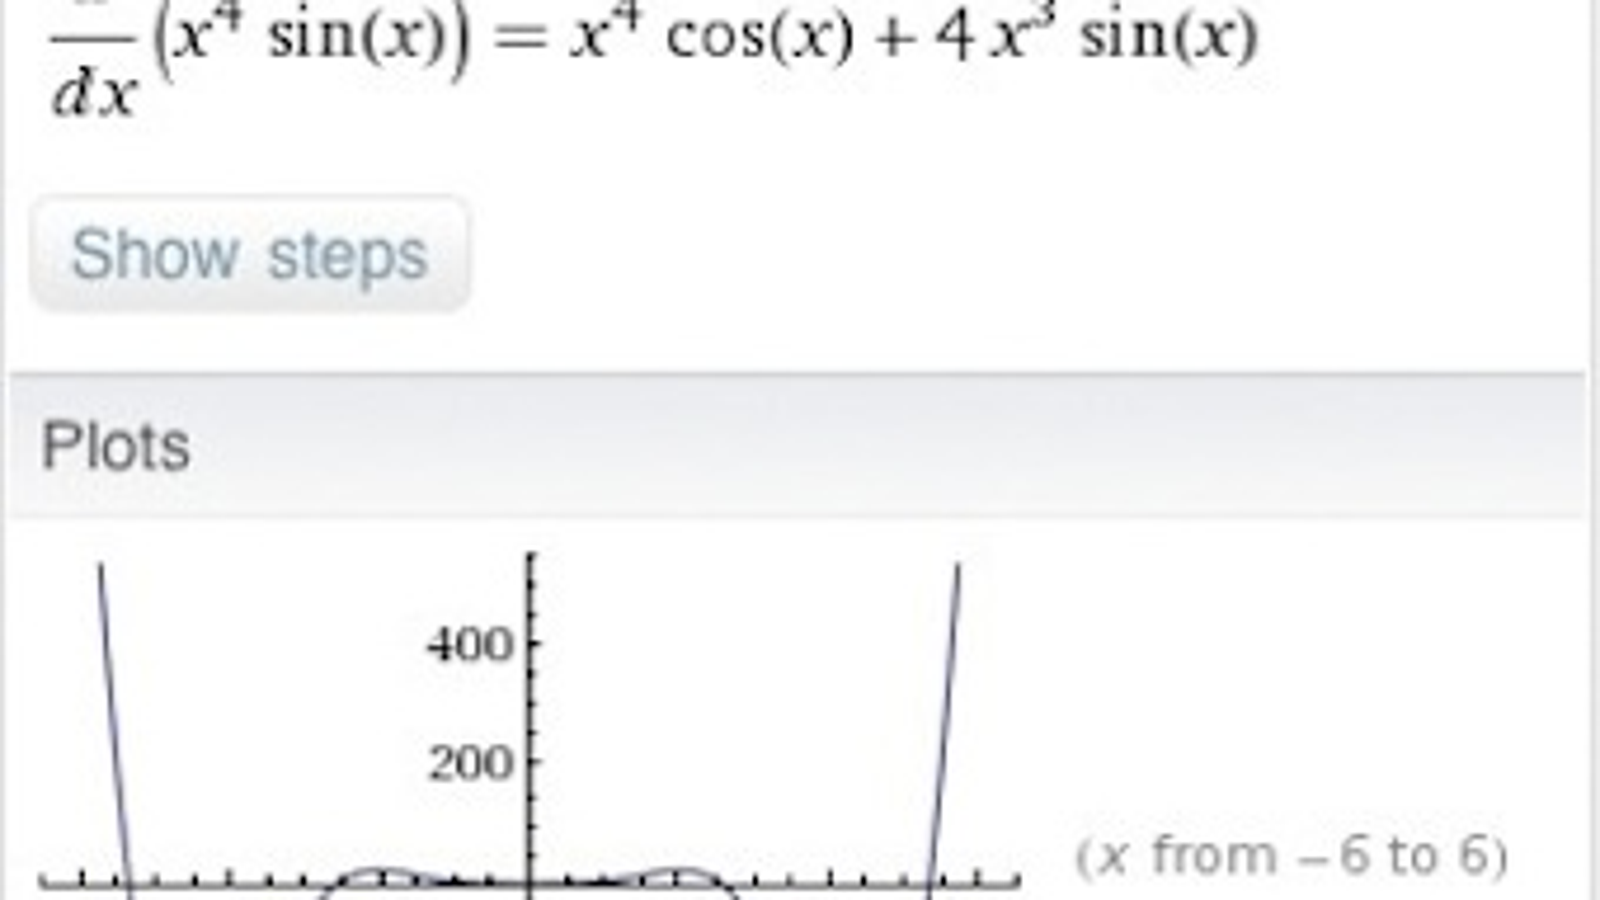 for iphone instal Wolfram Mathematica 13.3.1 free